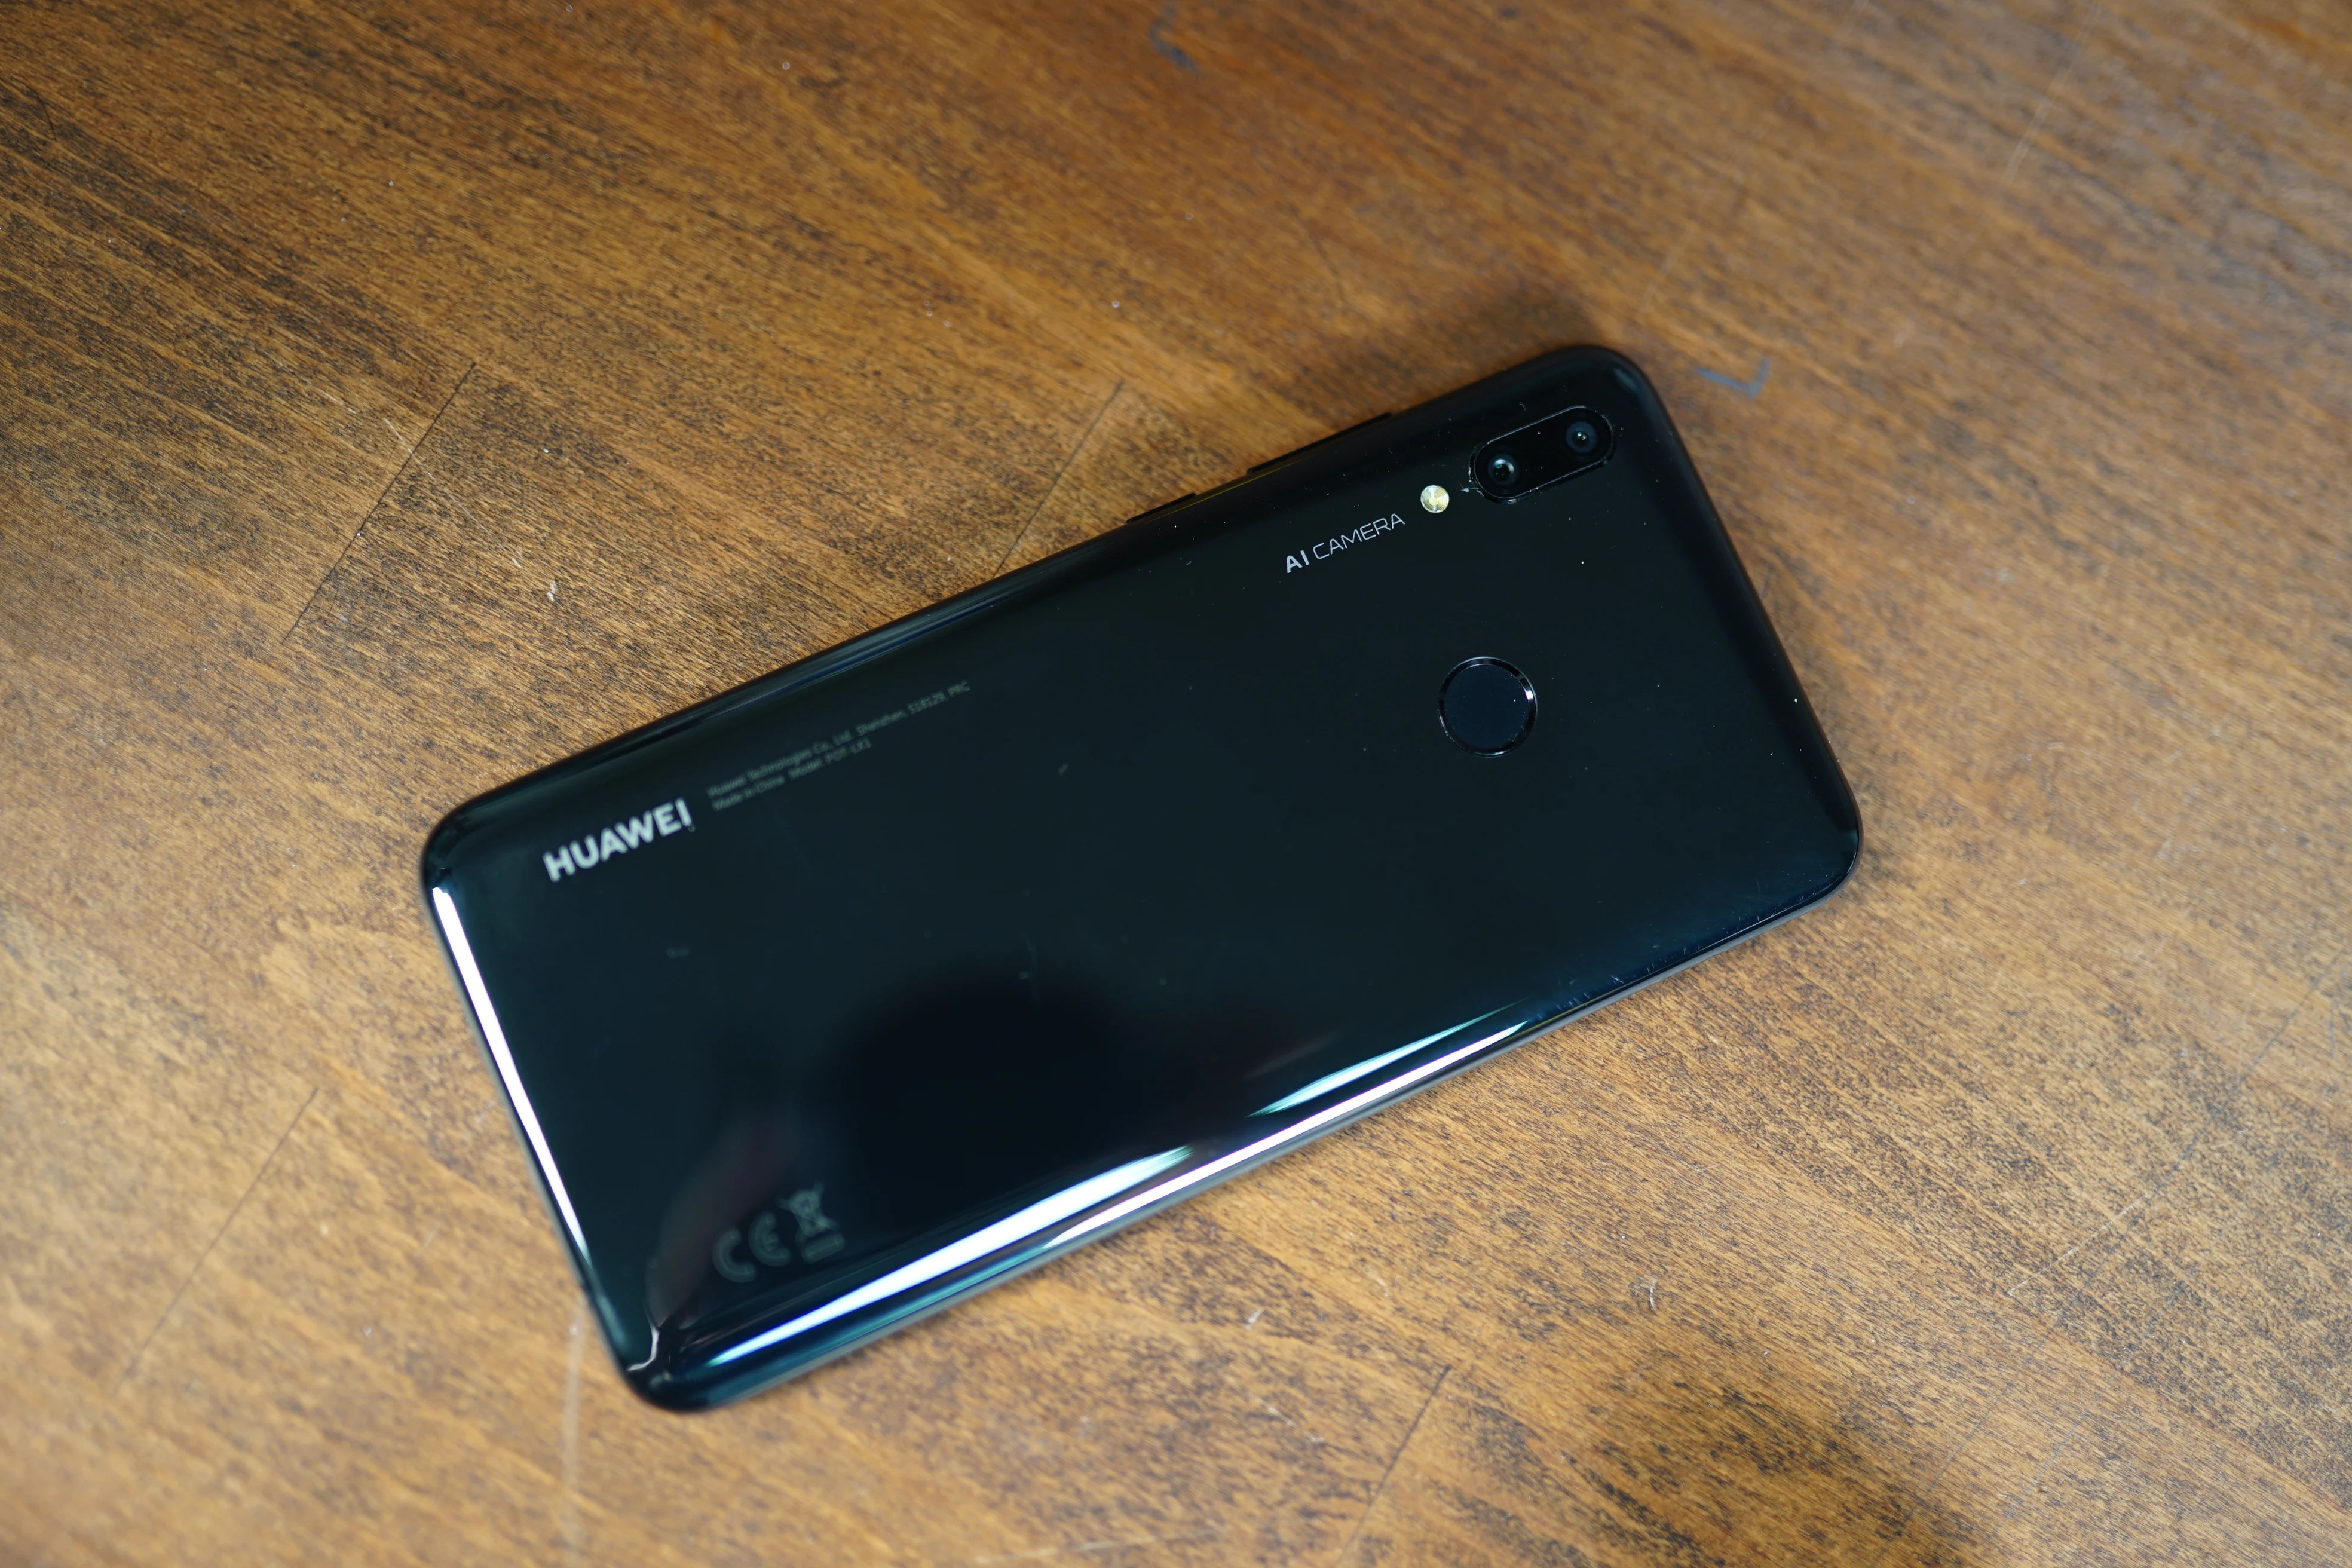 Huawei P Smart 2019. FrAndroid 5